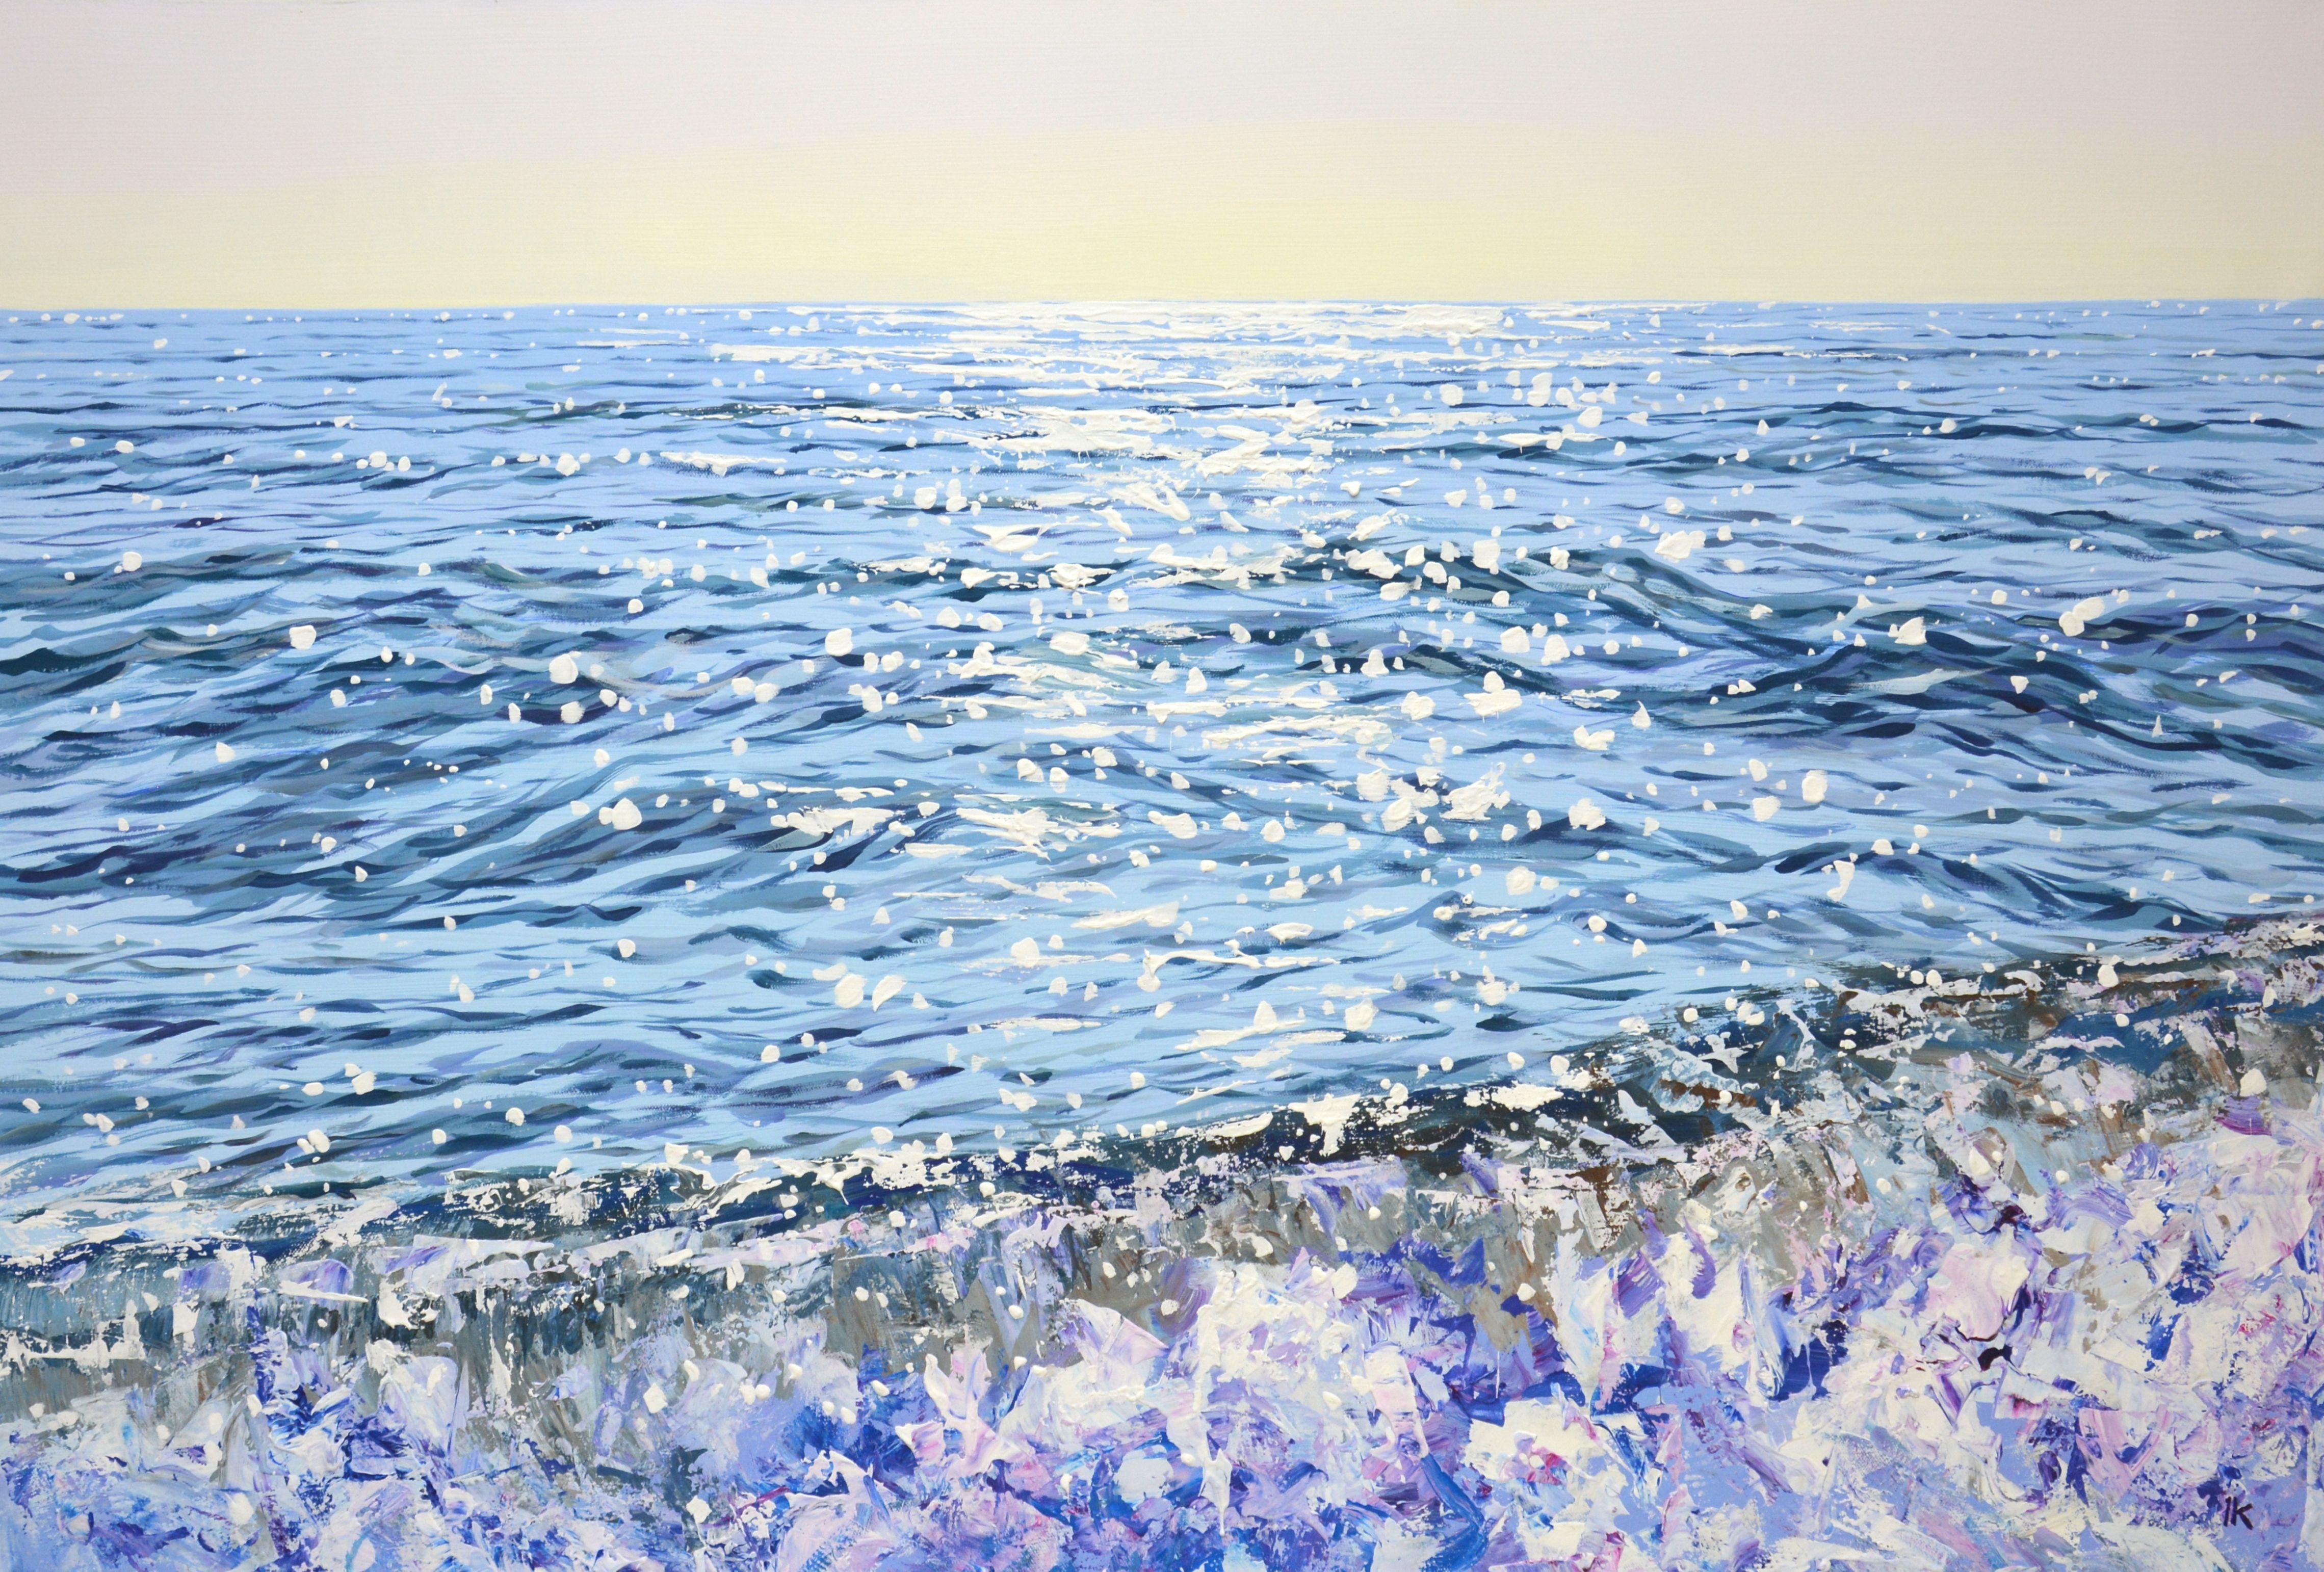 Sea. Waves. Glare.  Summer seascape: blue water, ocean, small waves, sun glare on the water, clear sky create an atmosphere of relaxation and romance. Made in the style of realism, the blue and white palette emphasizes the energy of the water. Part